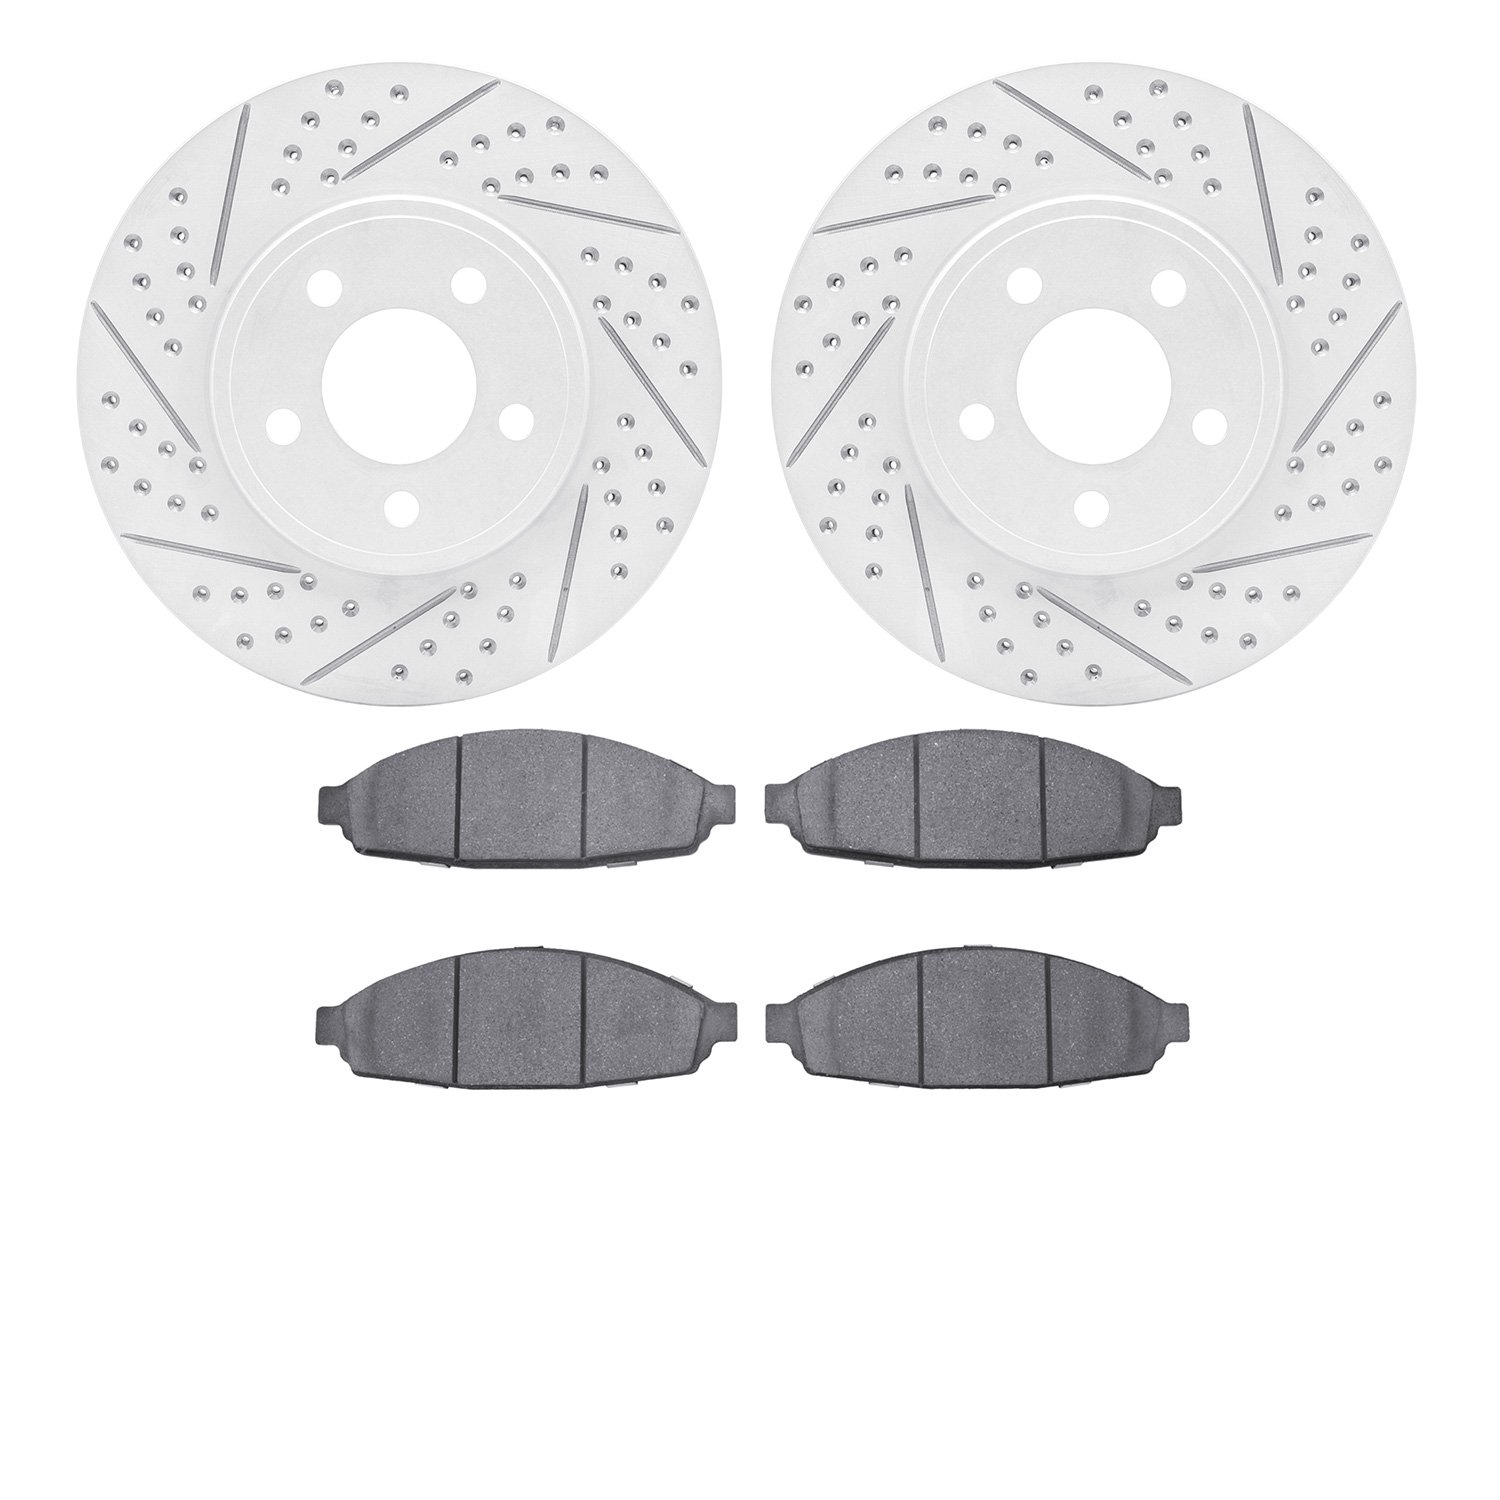 2502-56006 Geoperformance Drilled/Slotted Rotors w/5000 Advanced Brake Pads Kit, 2003-2011 Ford/Lincoln/Mercury/Mazda, Position: